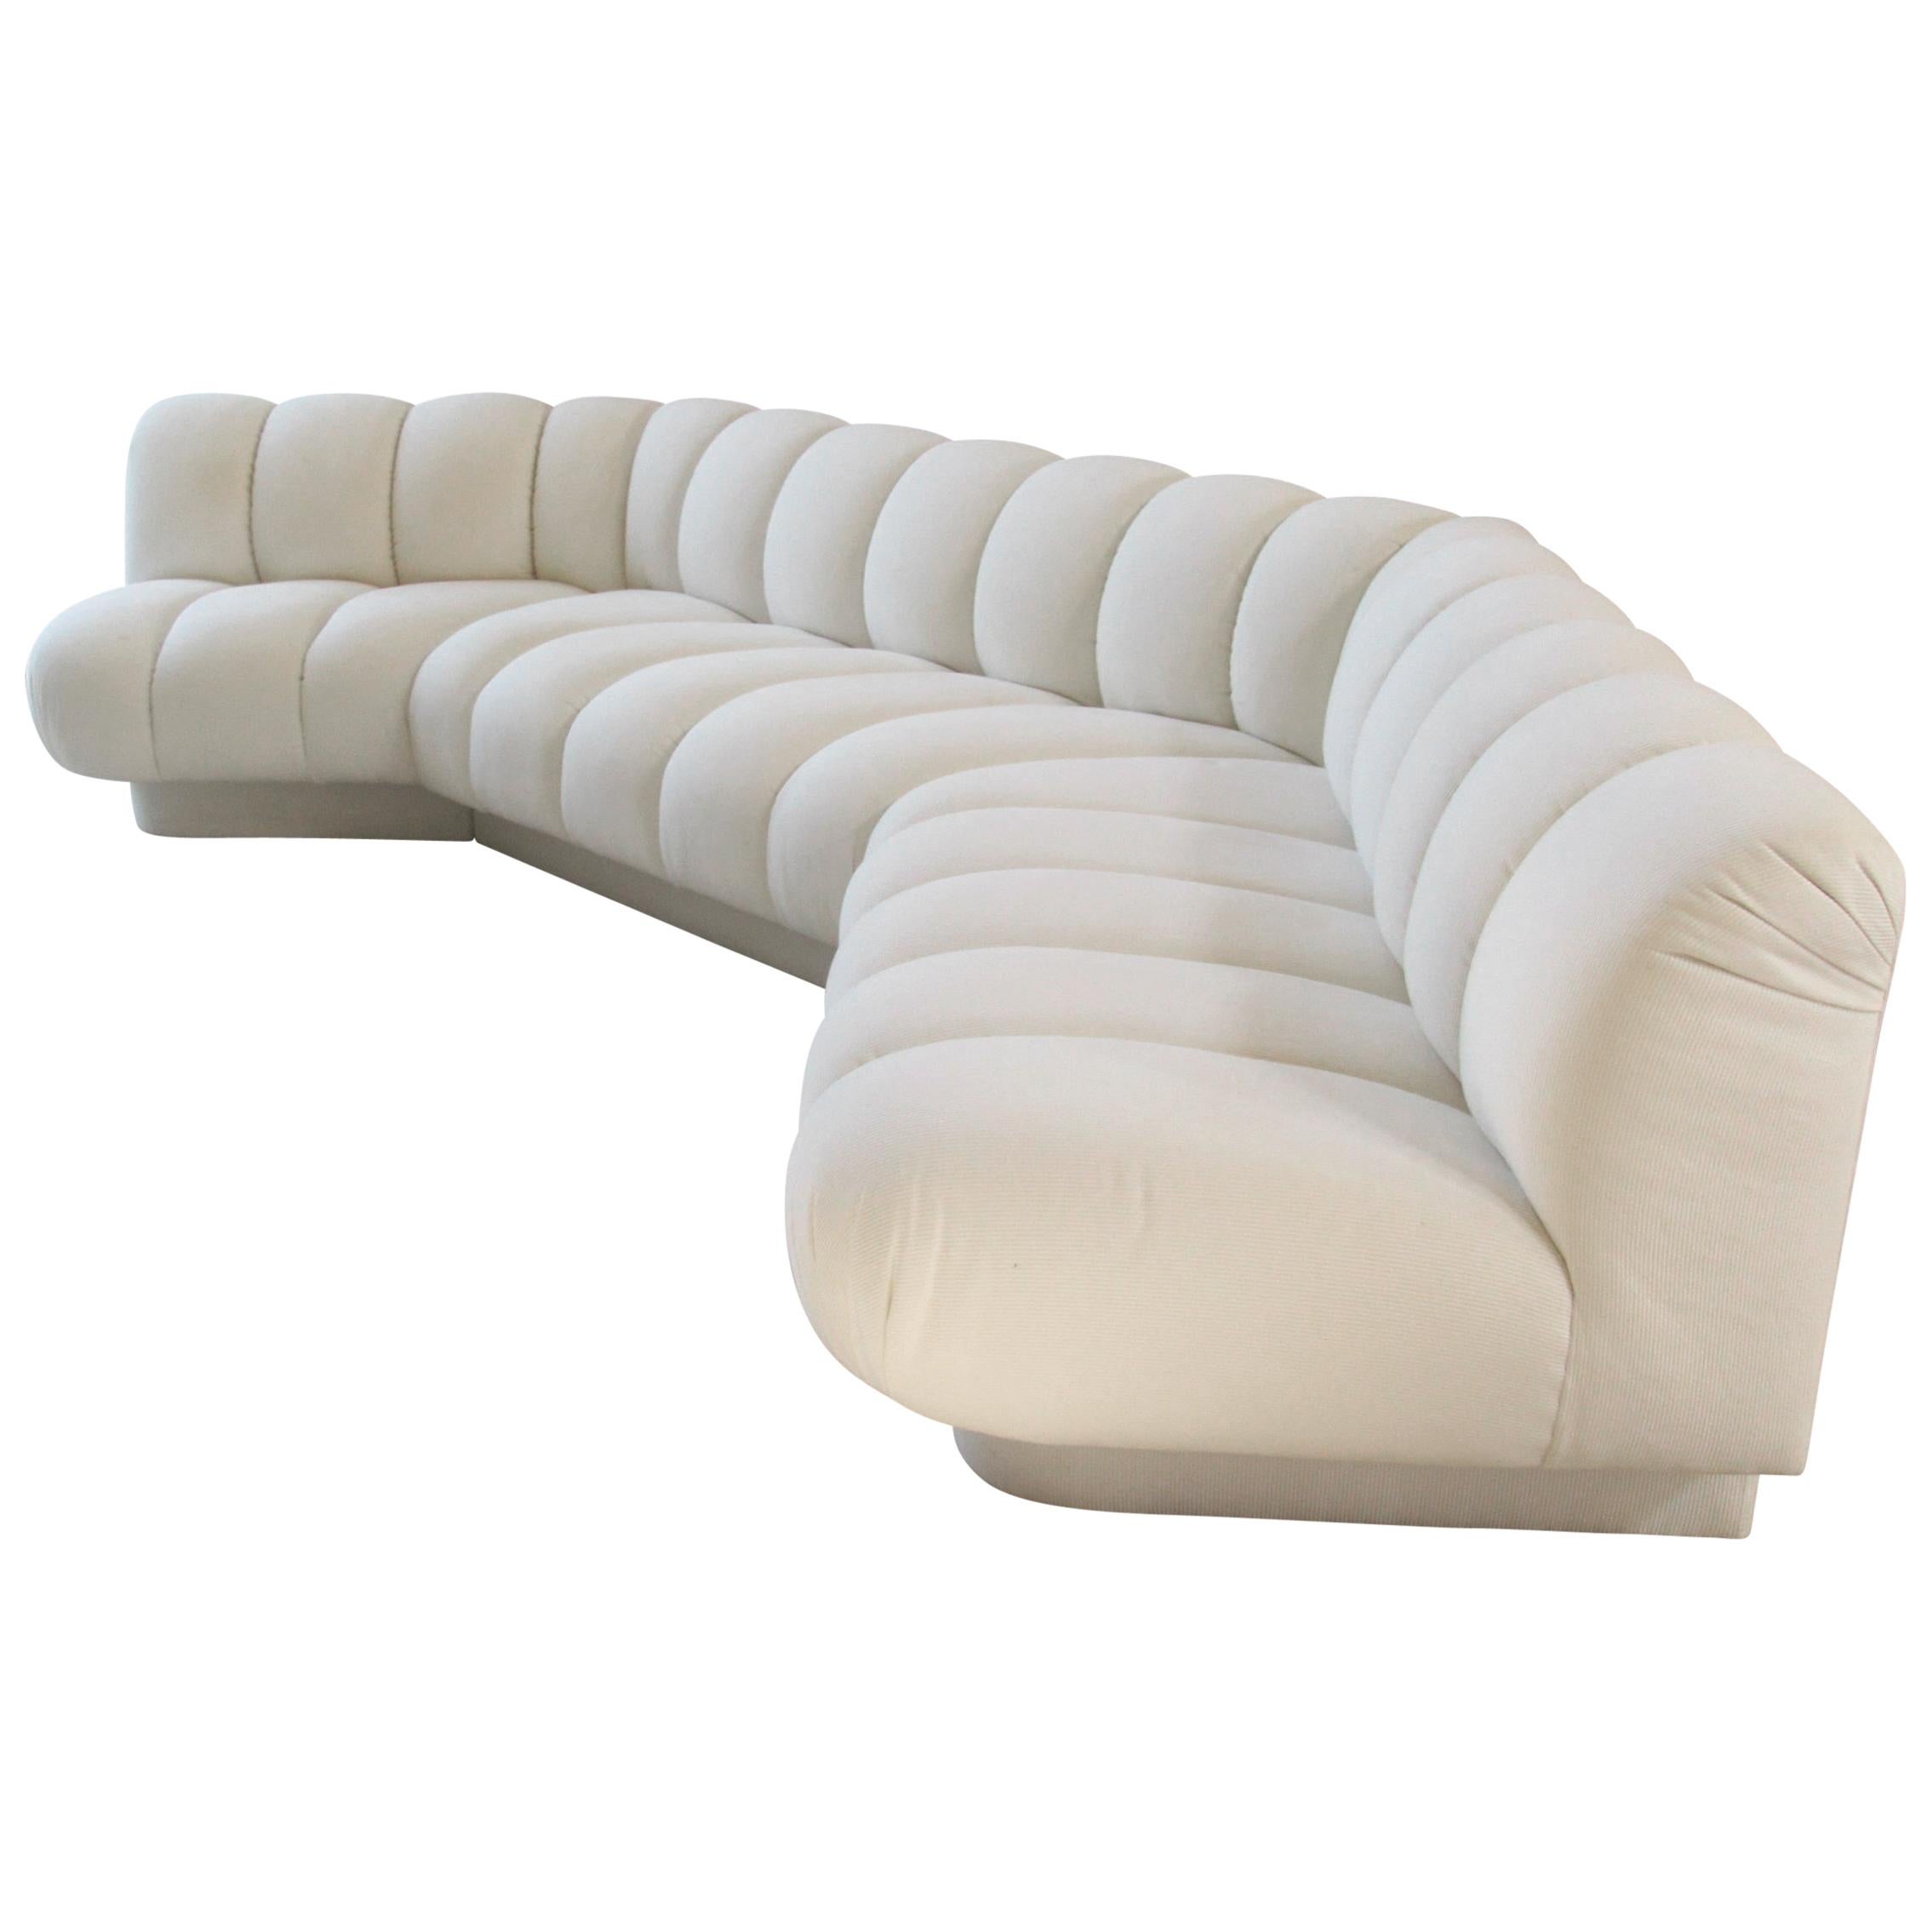 Channel Tufted White Sofa by Steve Chase, 1980s